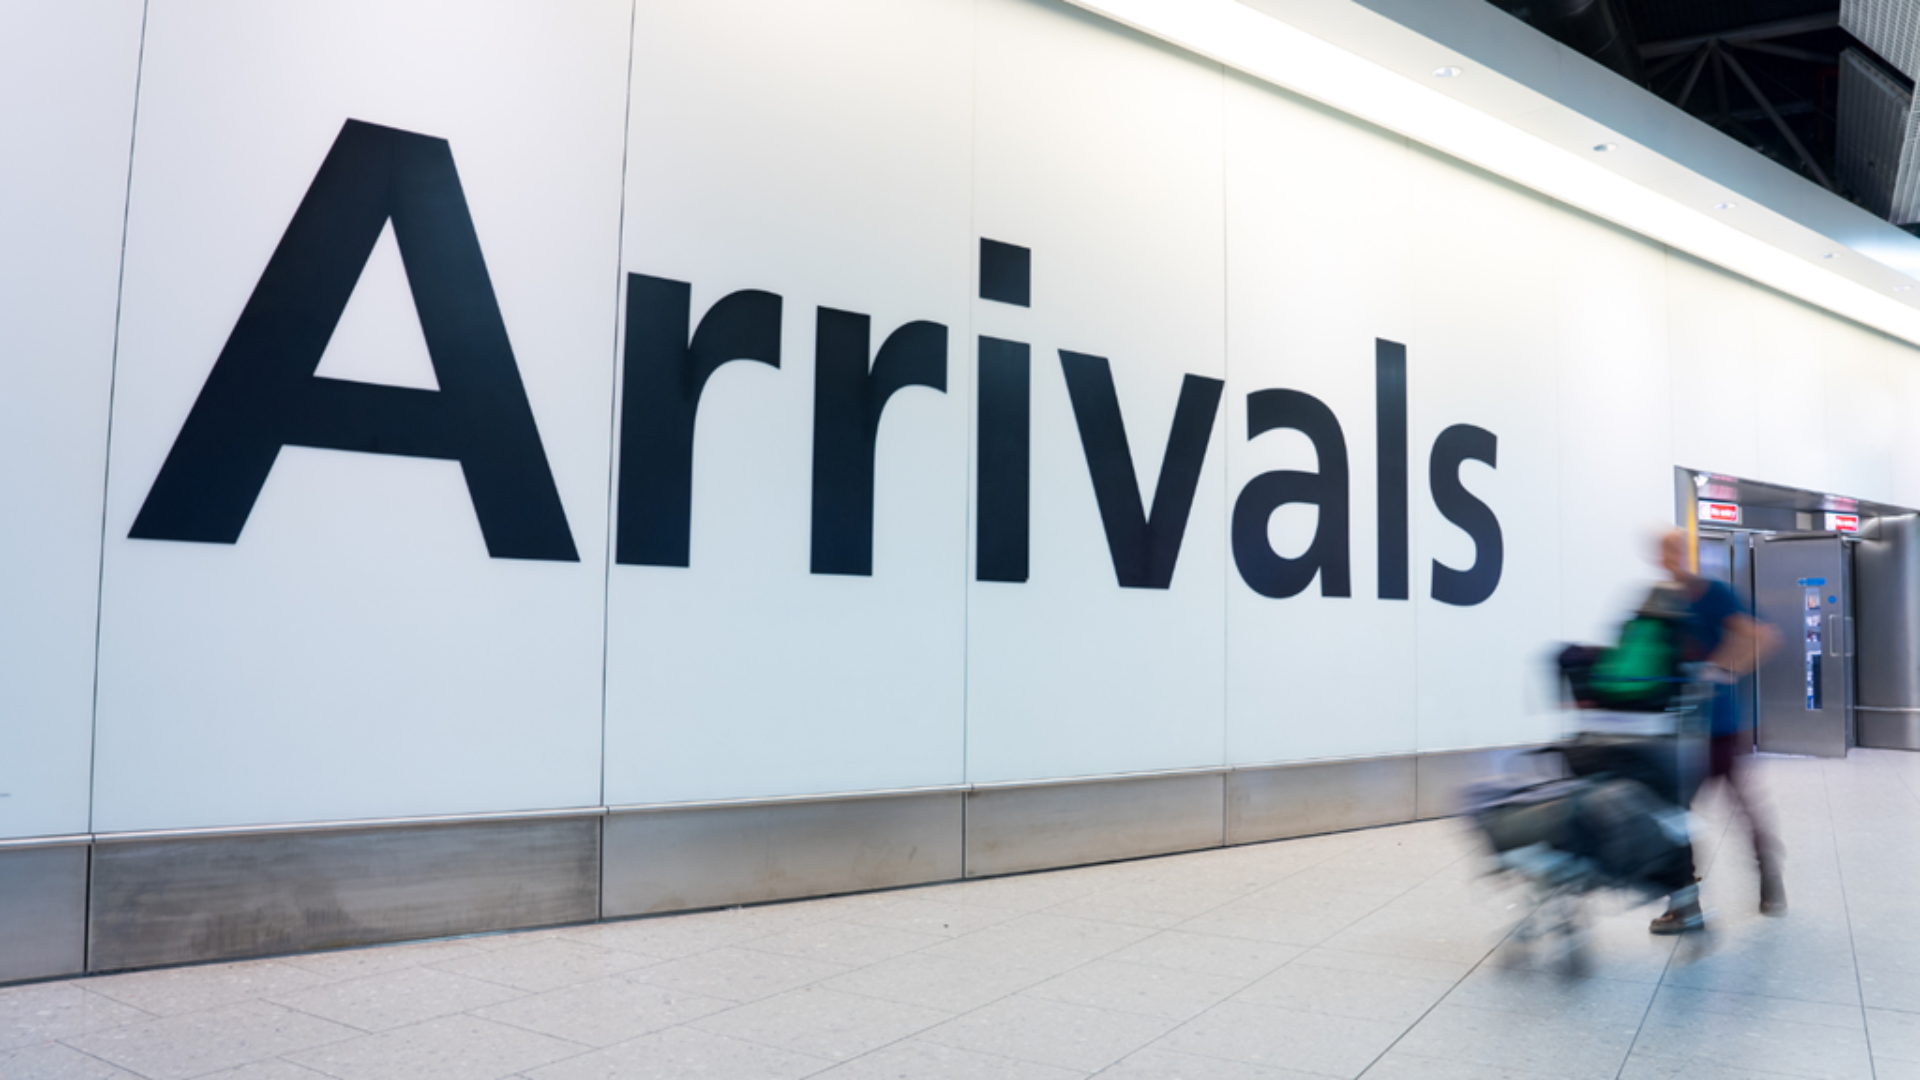 An image of an arrivals sign at an airport with a person blured with luggage walking past the sign. 